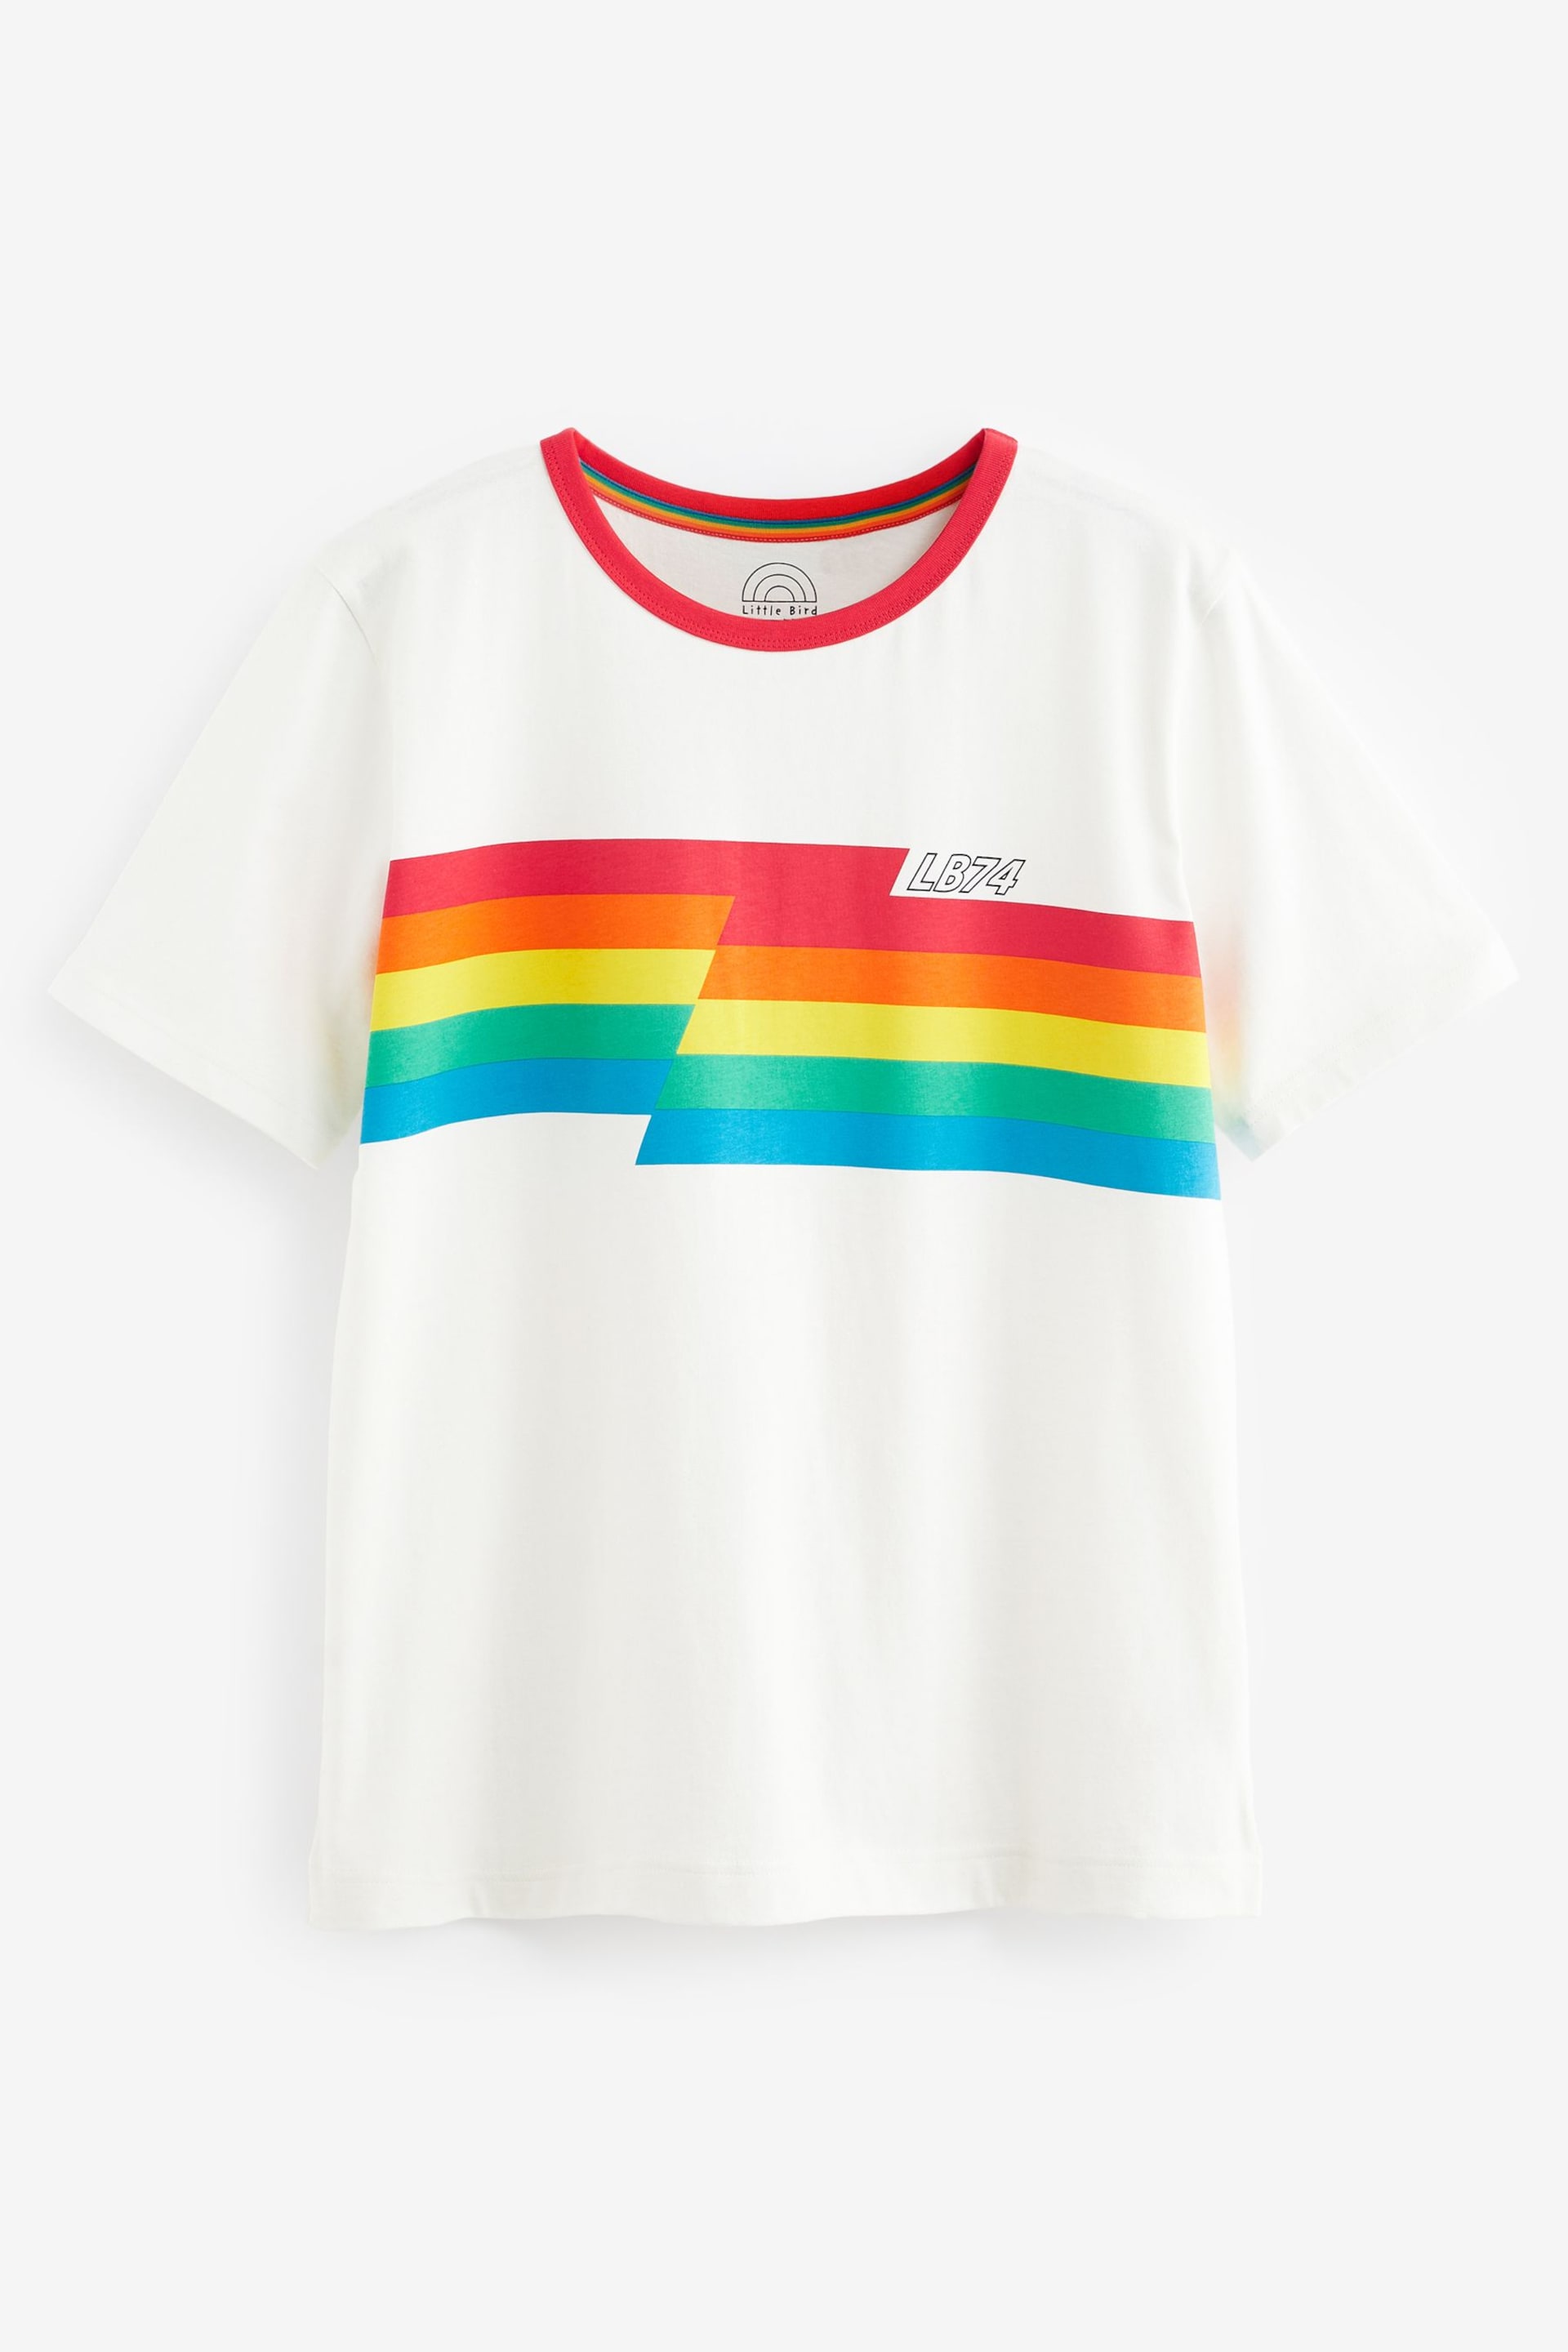 Little Bird by Jools Oliver Red Adults Short Sleeve Rainbow Stripe T-Shirt - Image 5 of 6